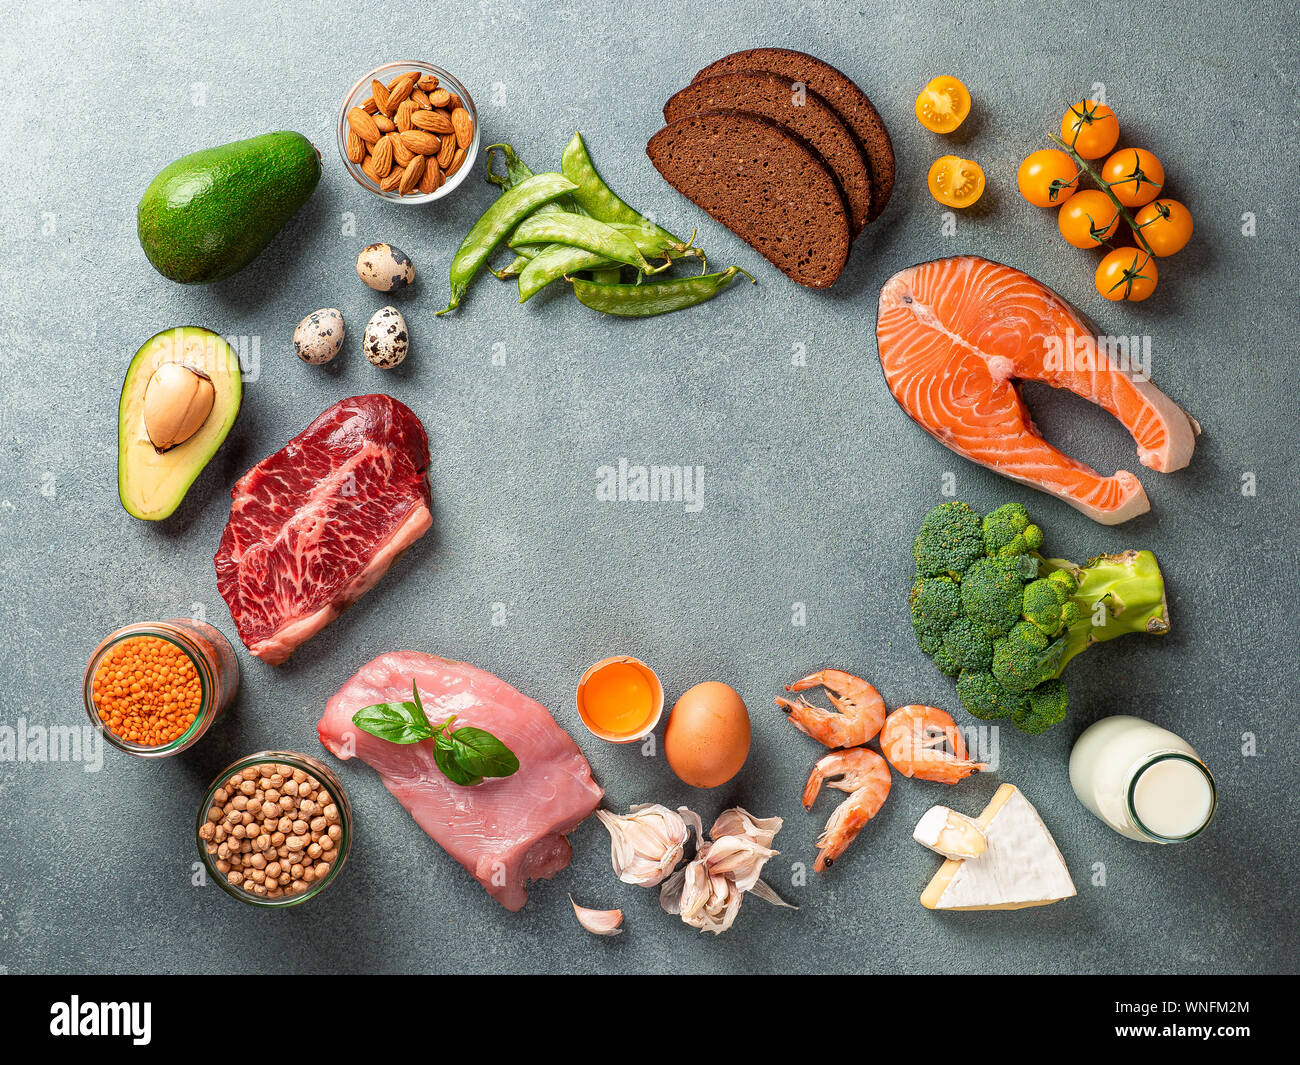 Balanced diet with copy space in center. Various healthy food ingredients on gray stone background. Top view or flat lay. Stock Photo